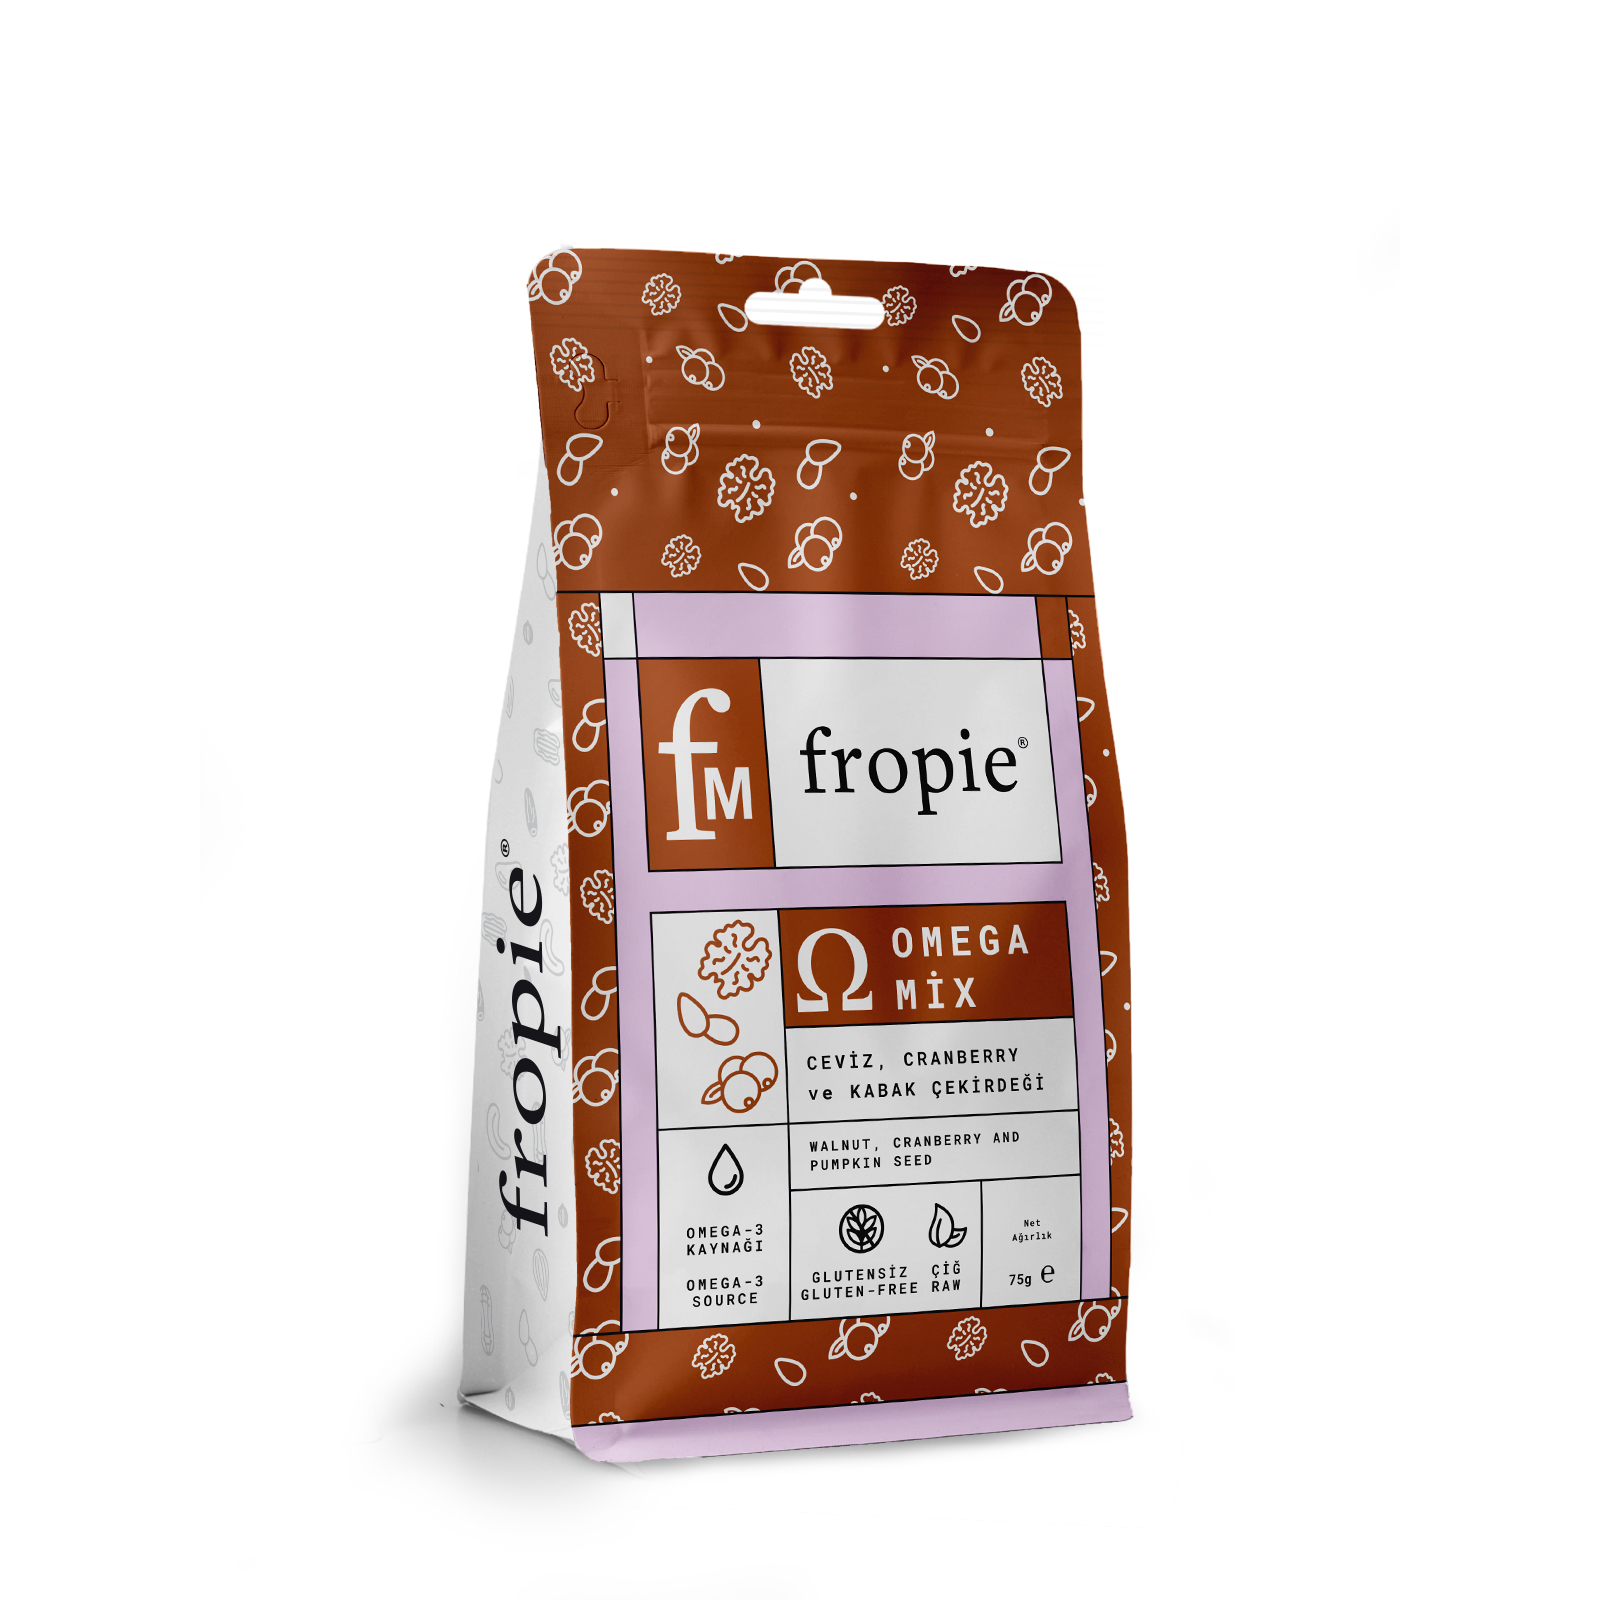 Fropie Omega Mix 75 G